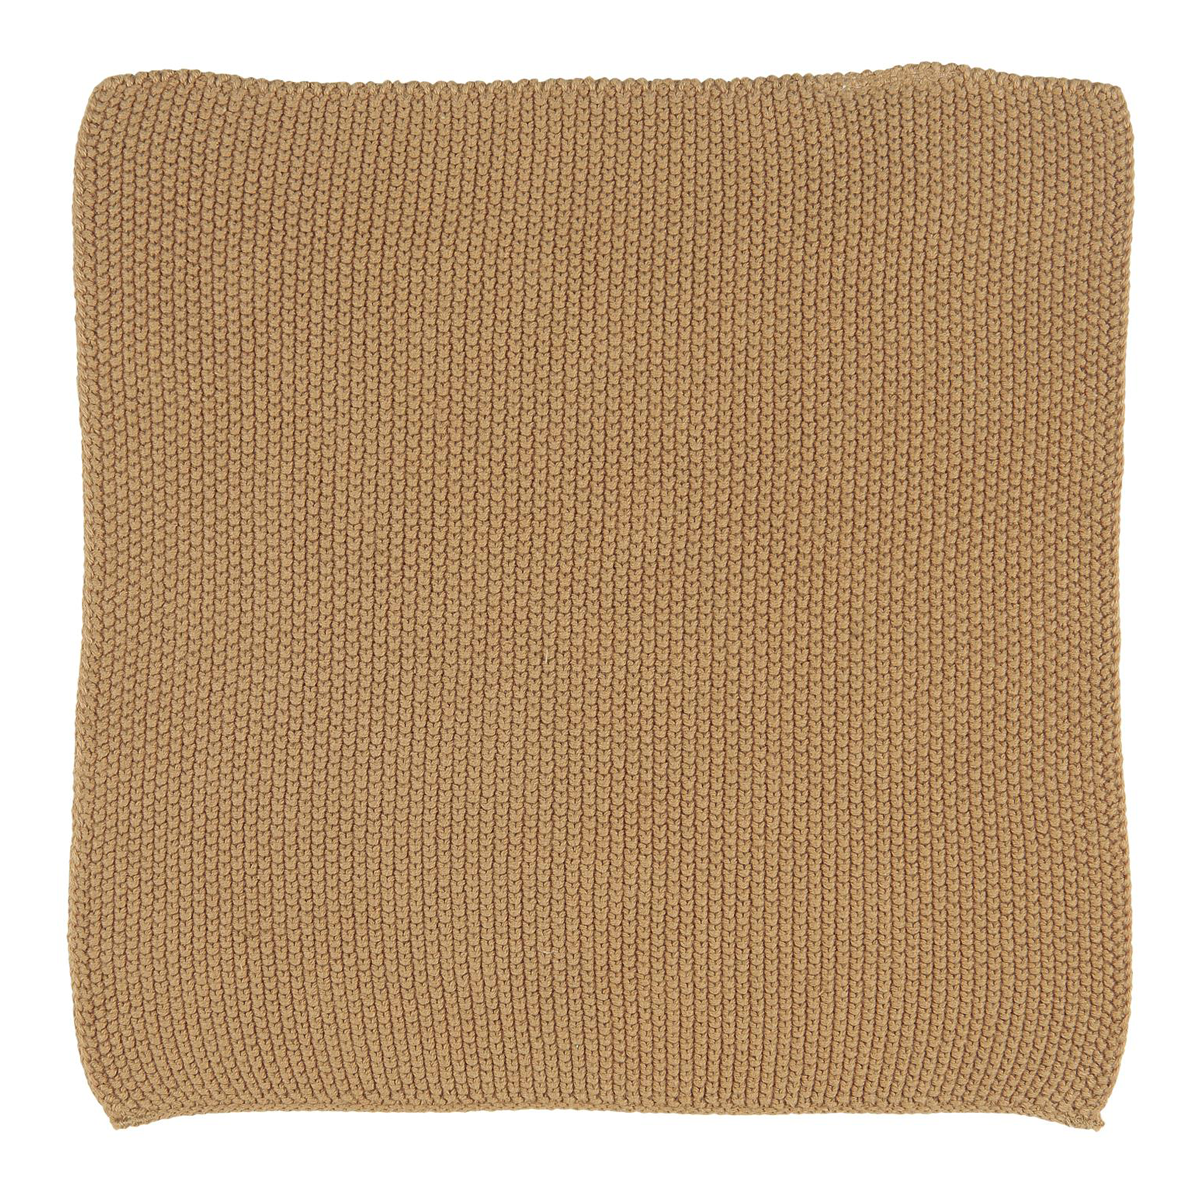 Amber Knitted Cotton Cloth